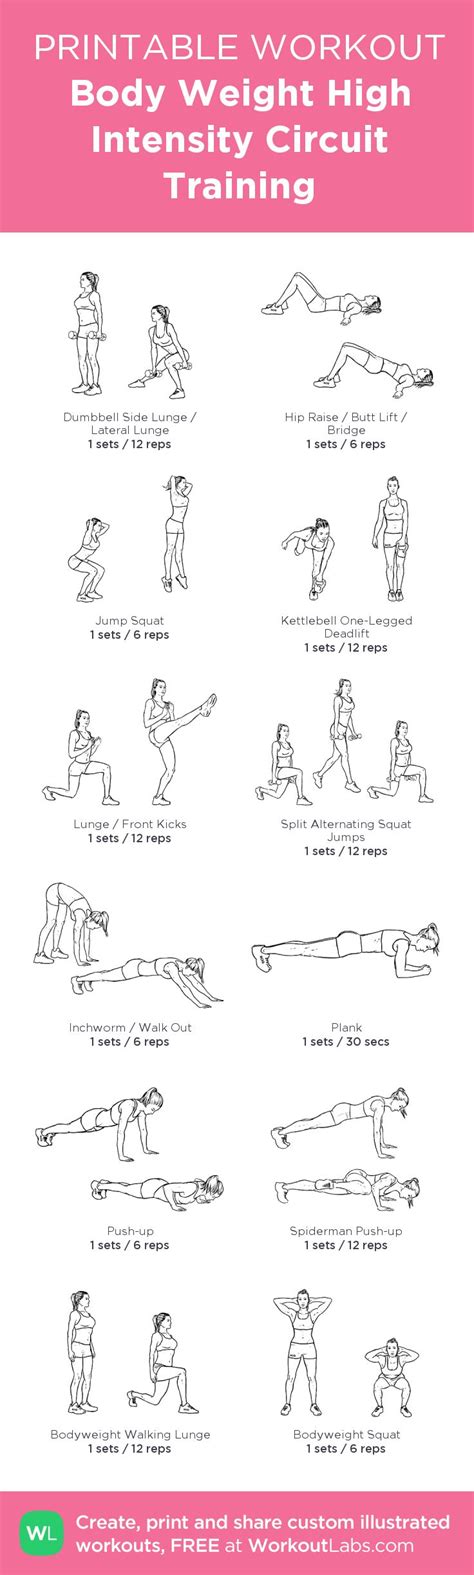 circuit training ideas  pinterest full body circuit workout  home workouts